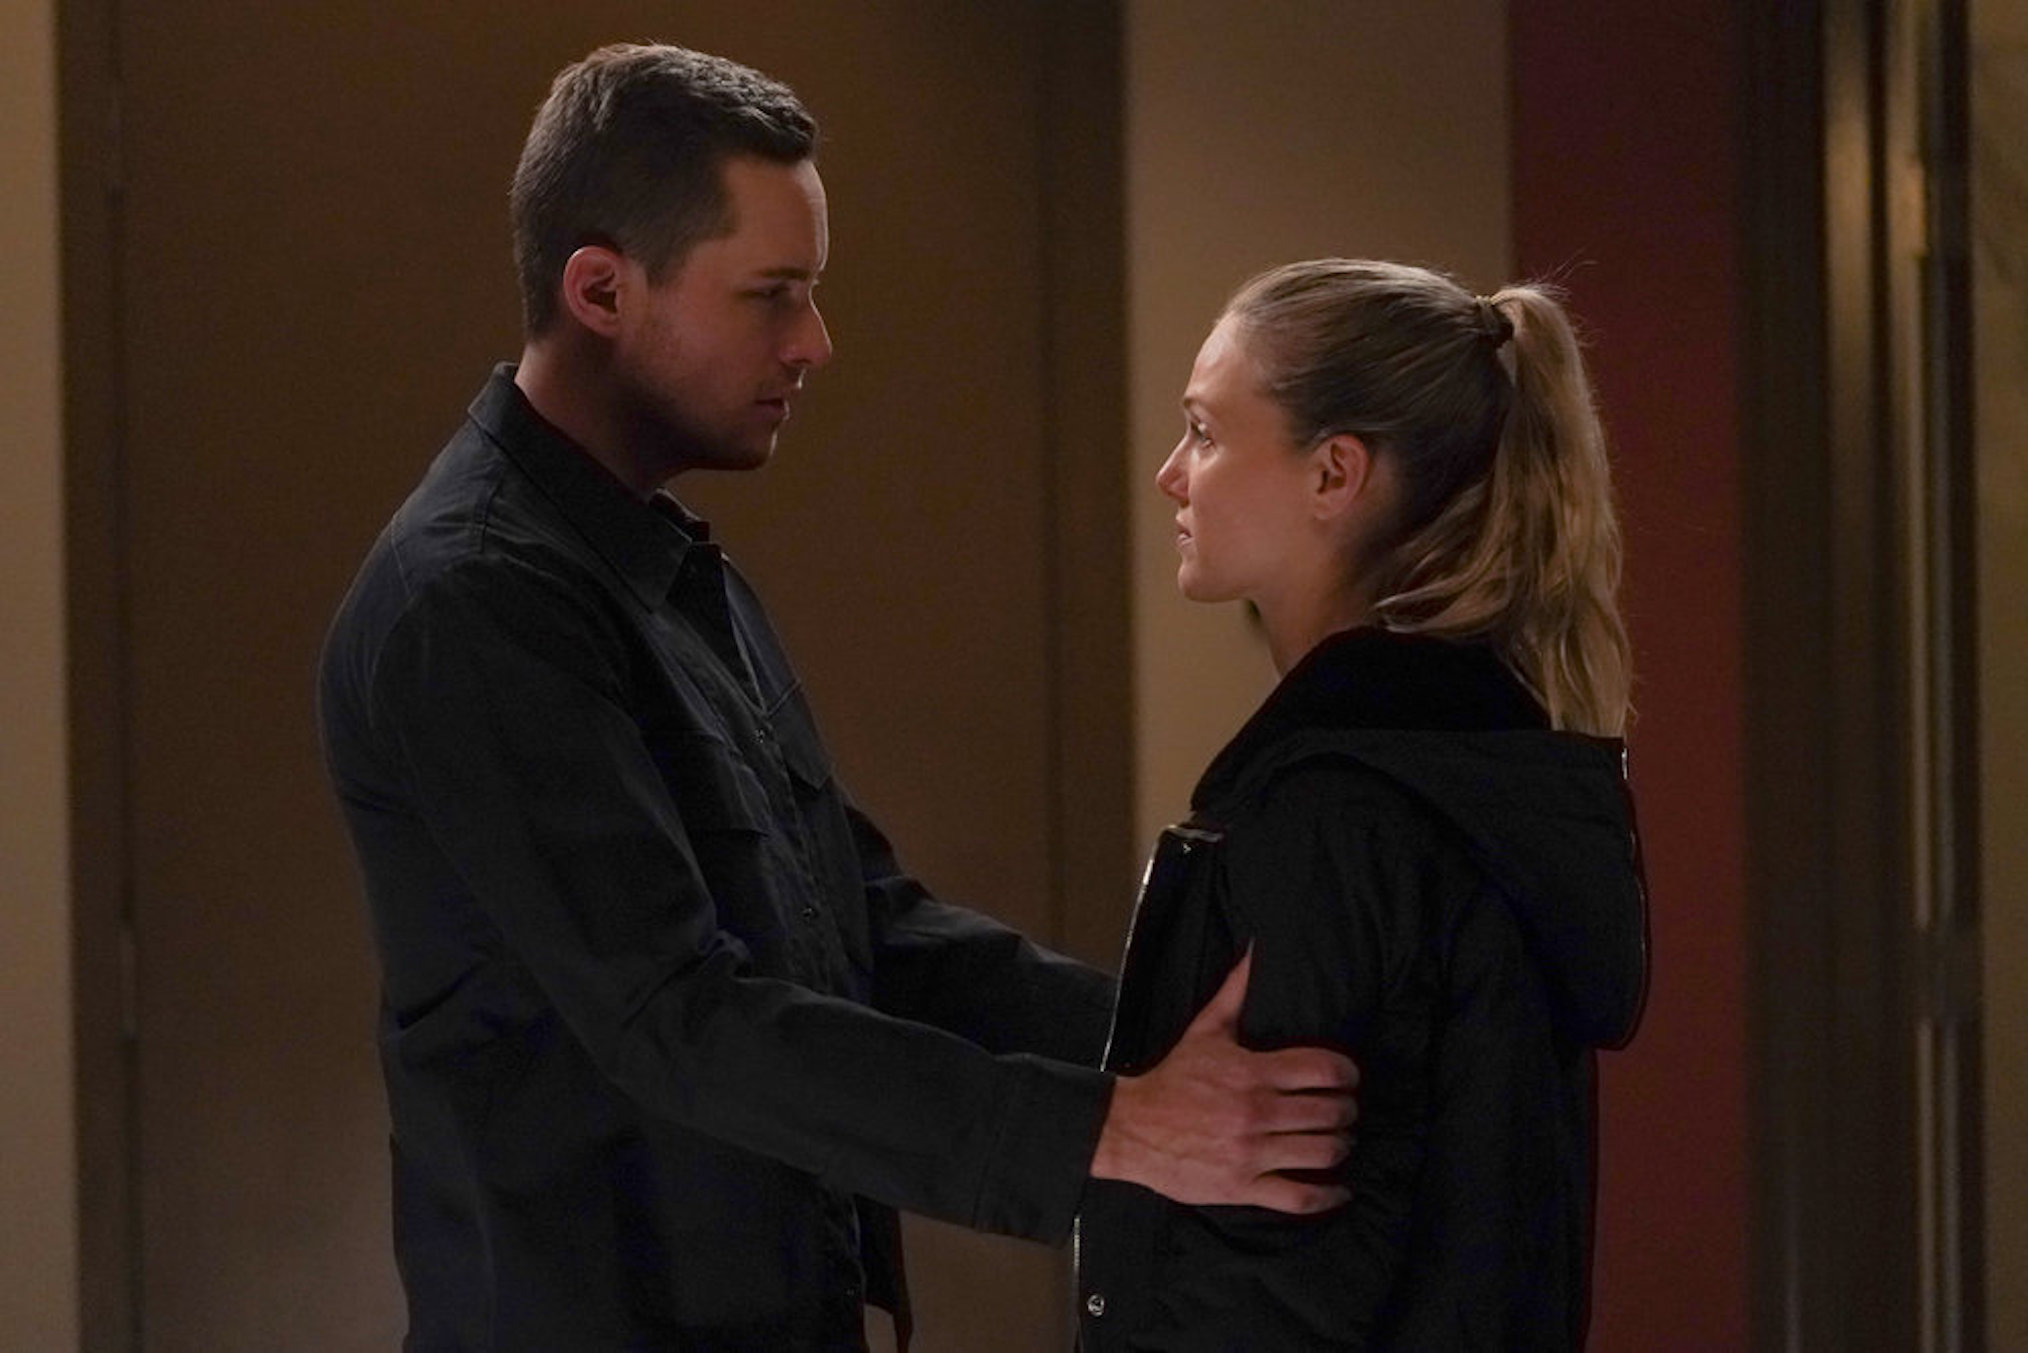 Jesse Lee Soffer as Halstead, Tracy Spiridakos as Upton in Chicago PD